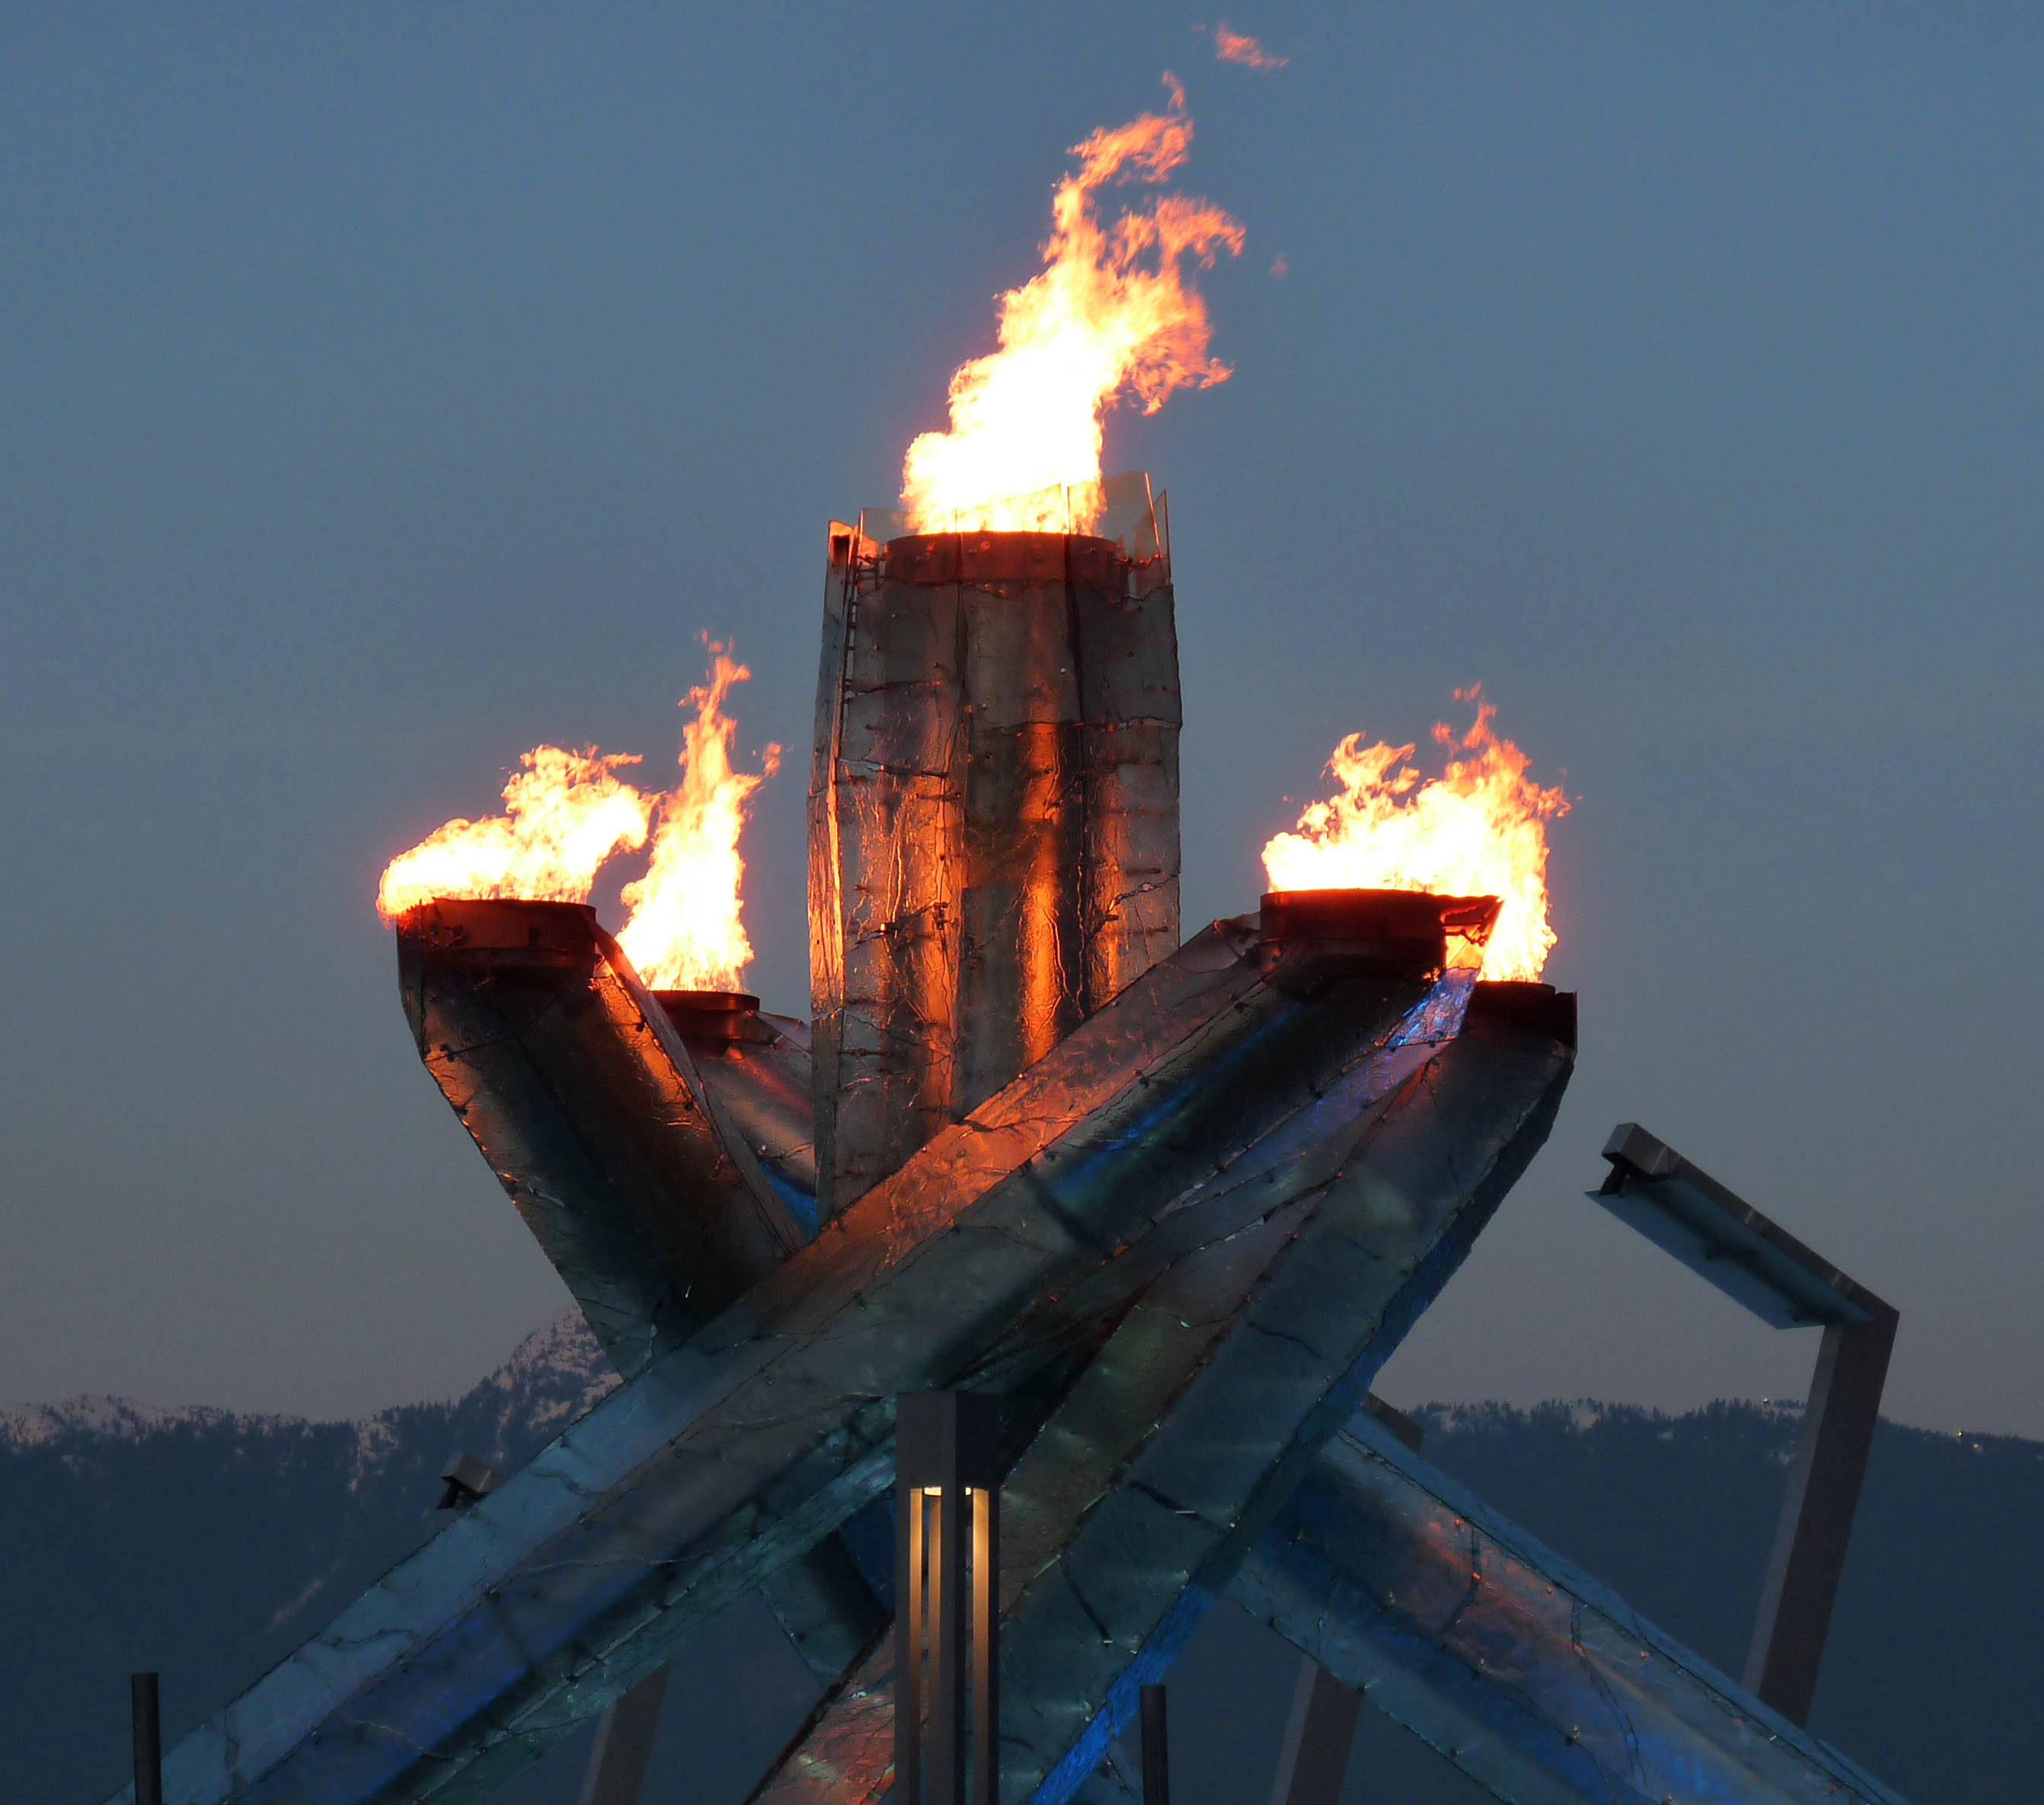 File:Vcr olympic flame.jpg - Wikimedia Commons